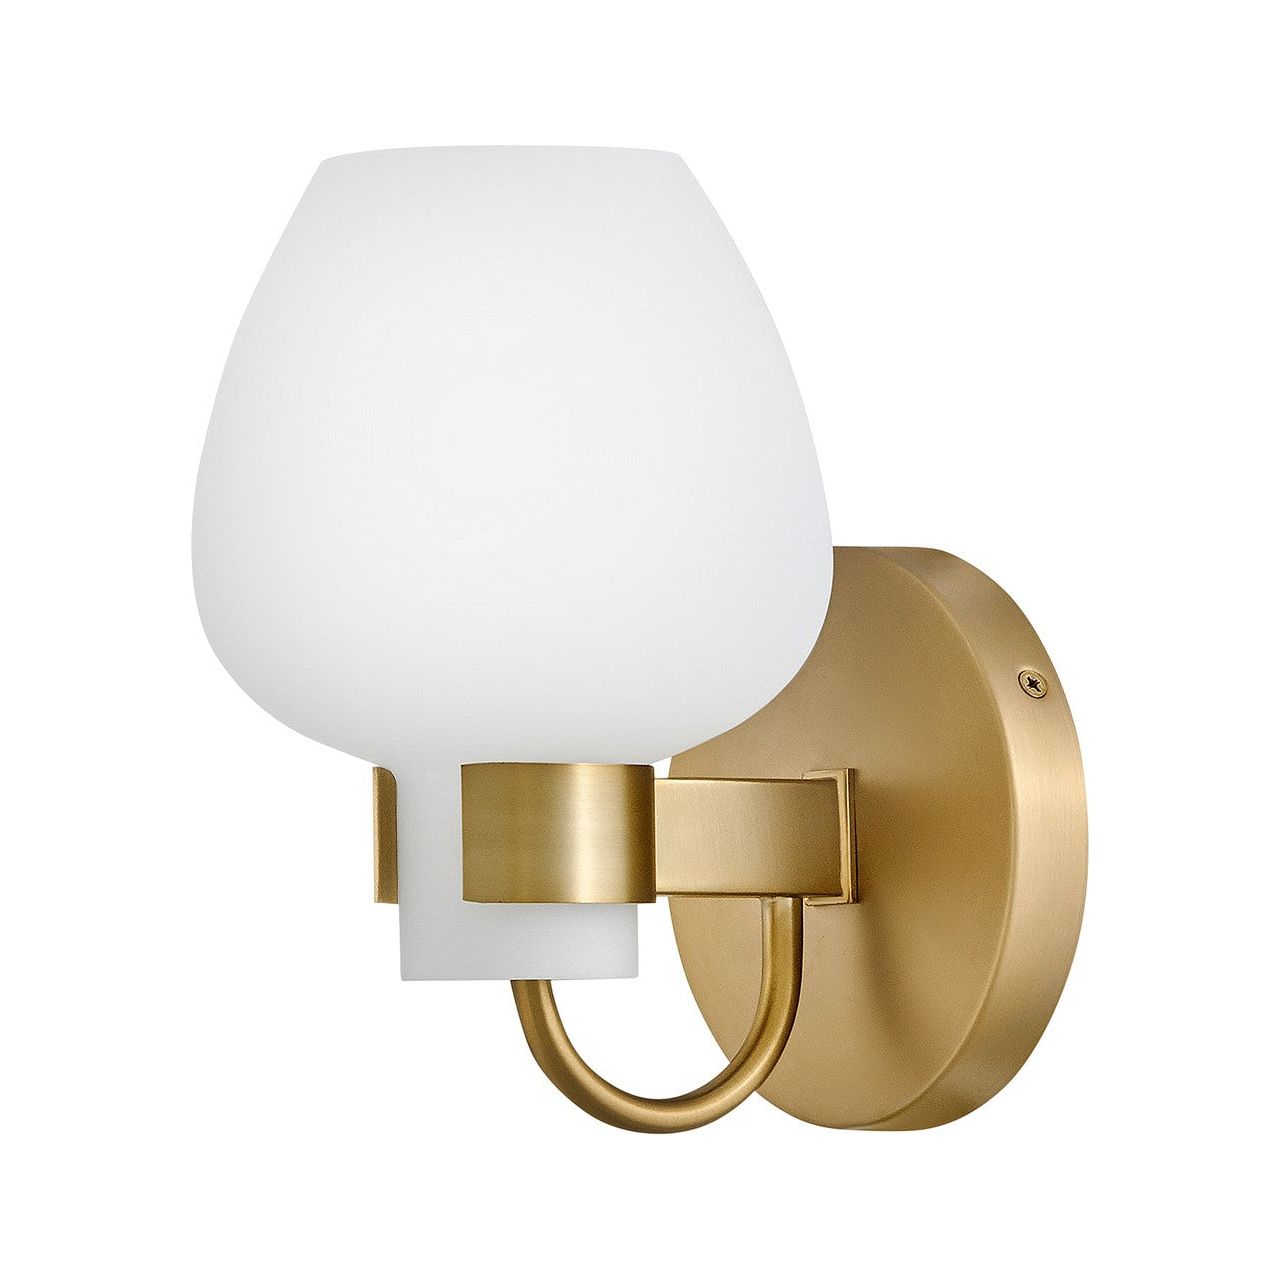 Hinkley Canada - 50950HB - LED Wall Sconce - Sylvie - Heritage Brass